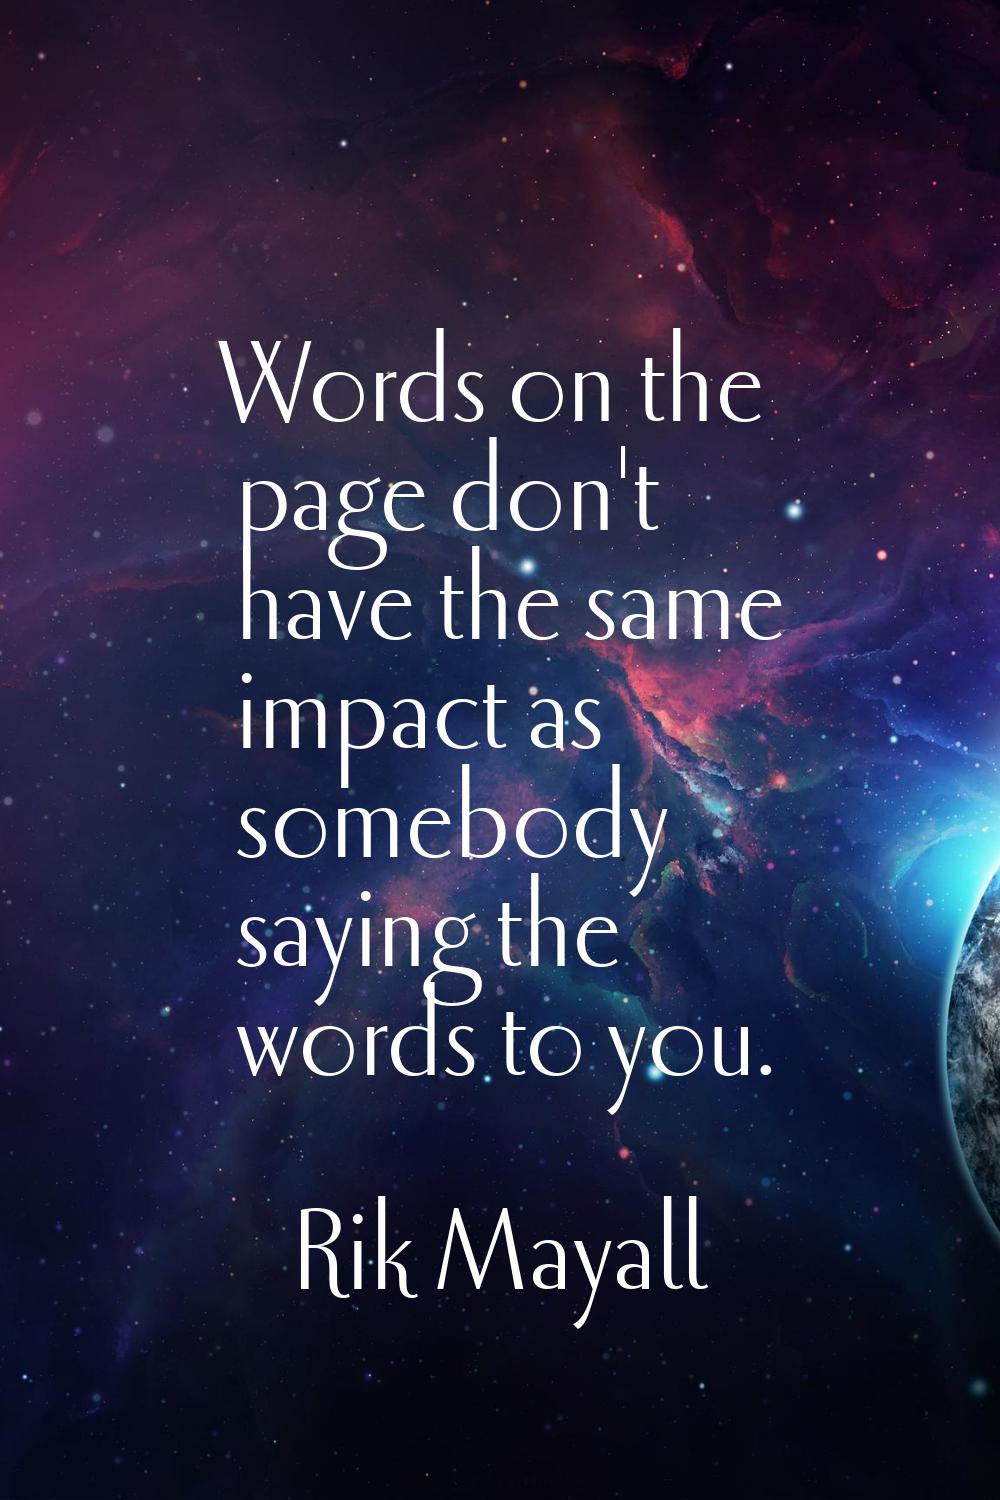 Words on the page don't have the same impact as somebody saying the words to you.